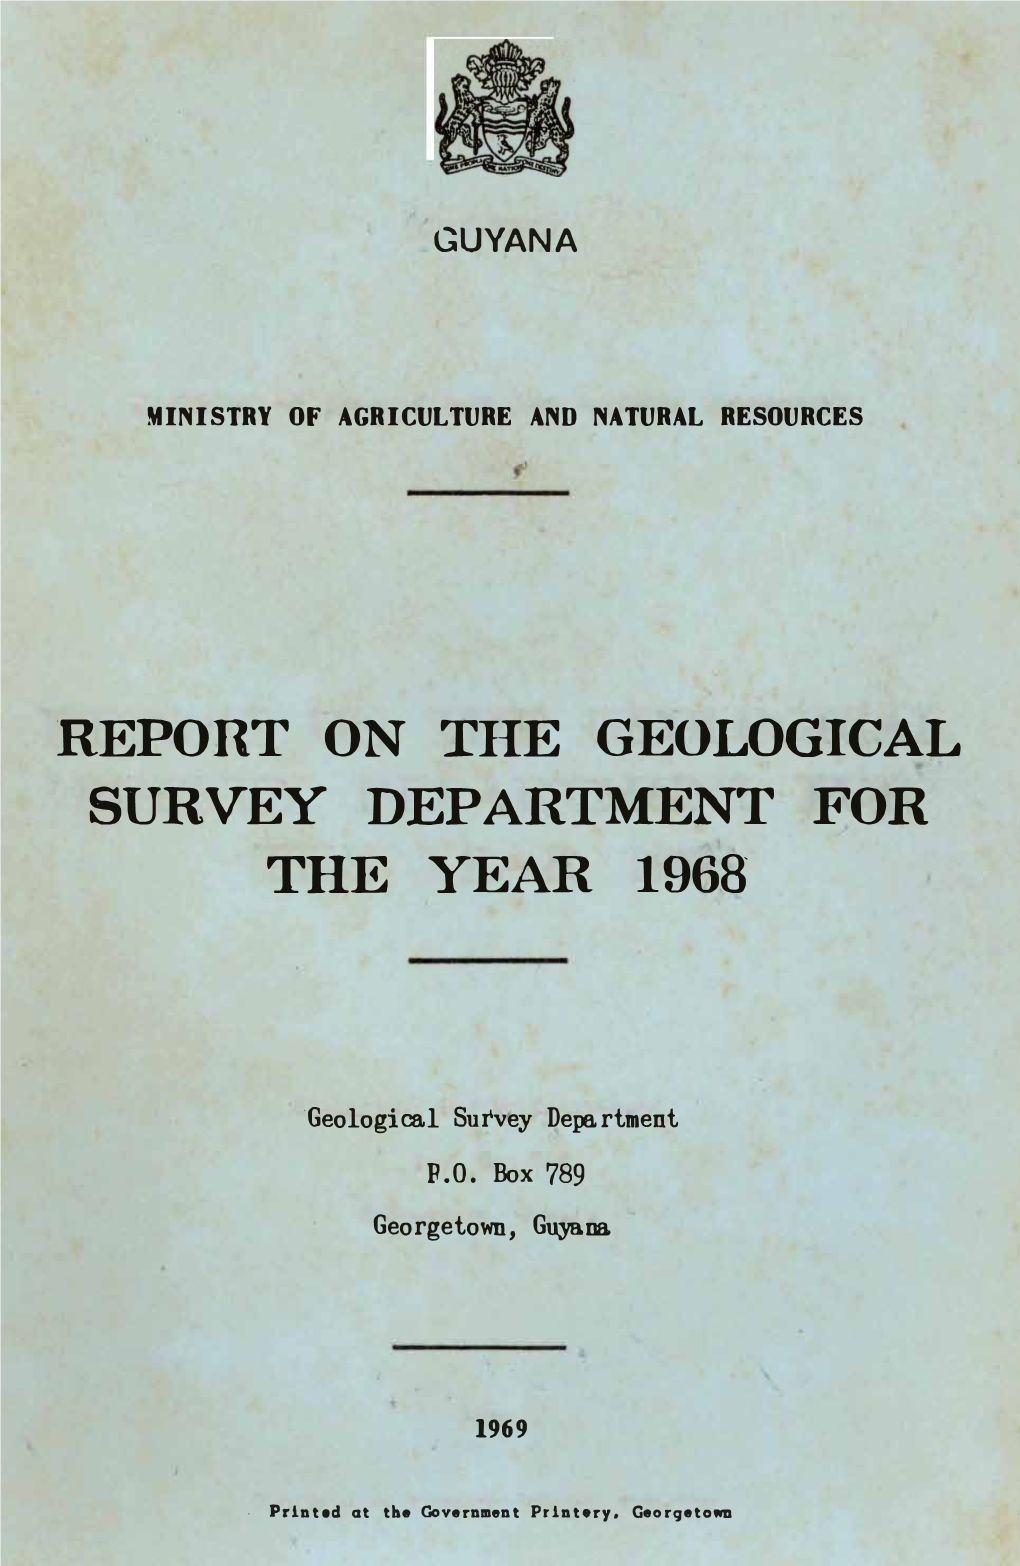 Report on the Geological Survey Department for the Year 1968